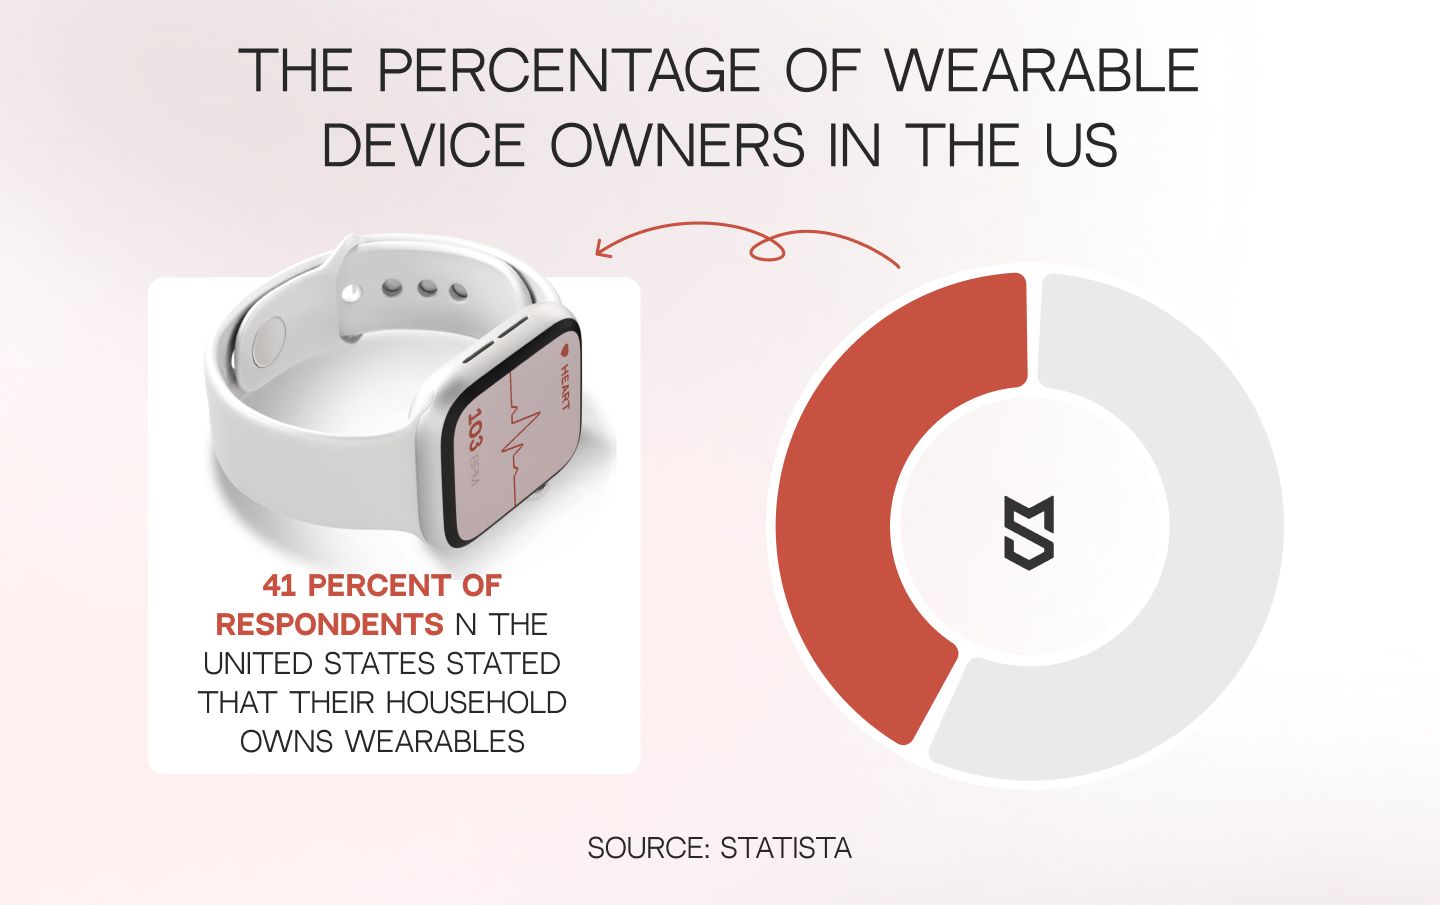 The percentage of wearable device owners in the US